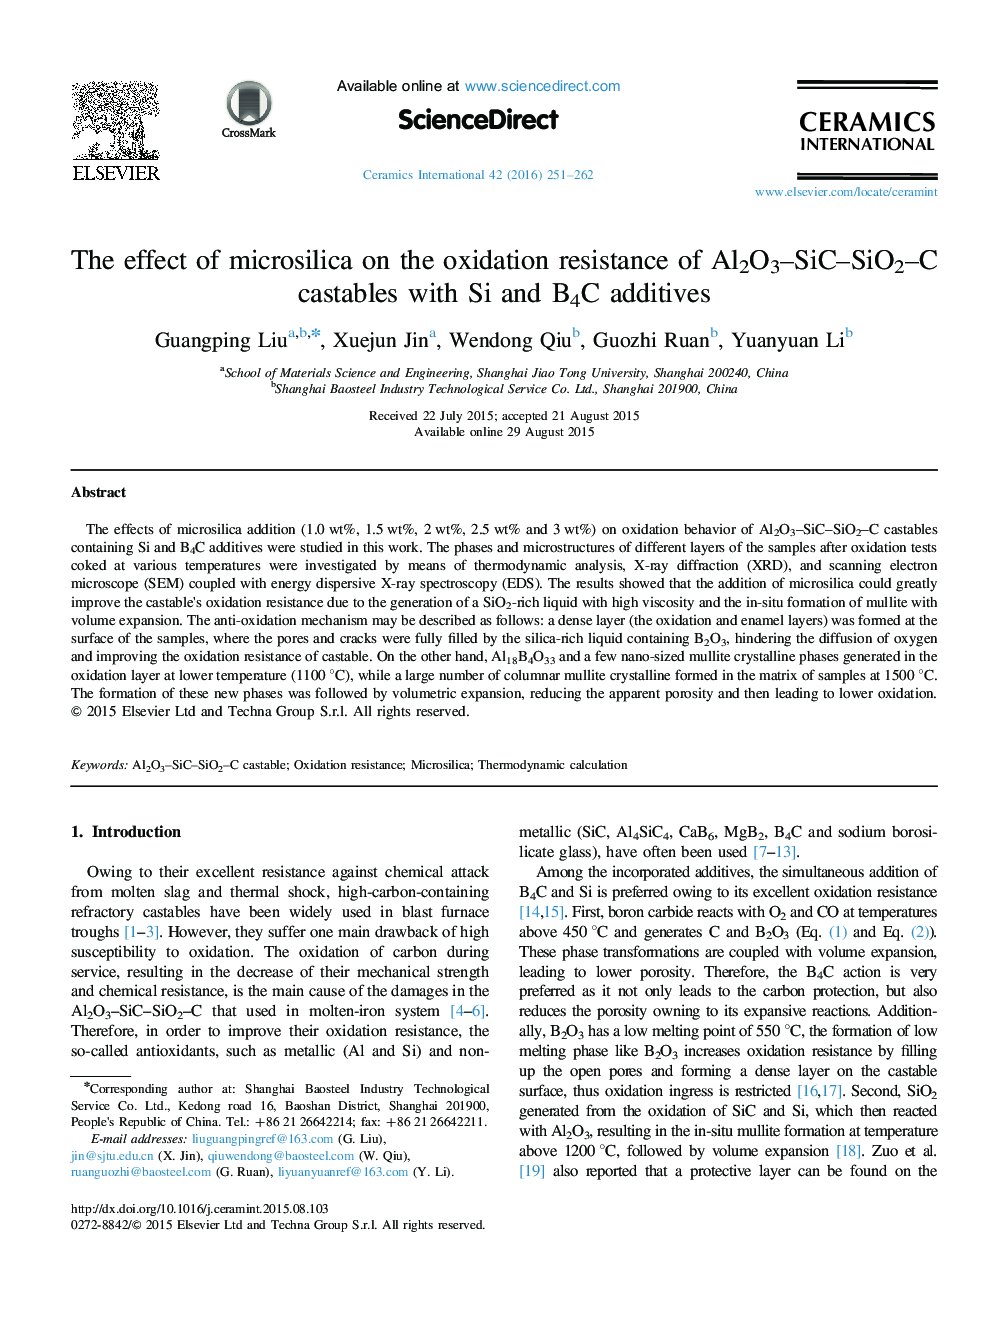 The effect of microsilica on the oxidation resistance of Al2O3-SiC-SiO2-C castables with Si and B4C additives